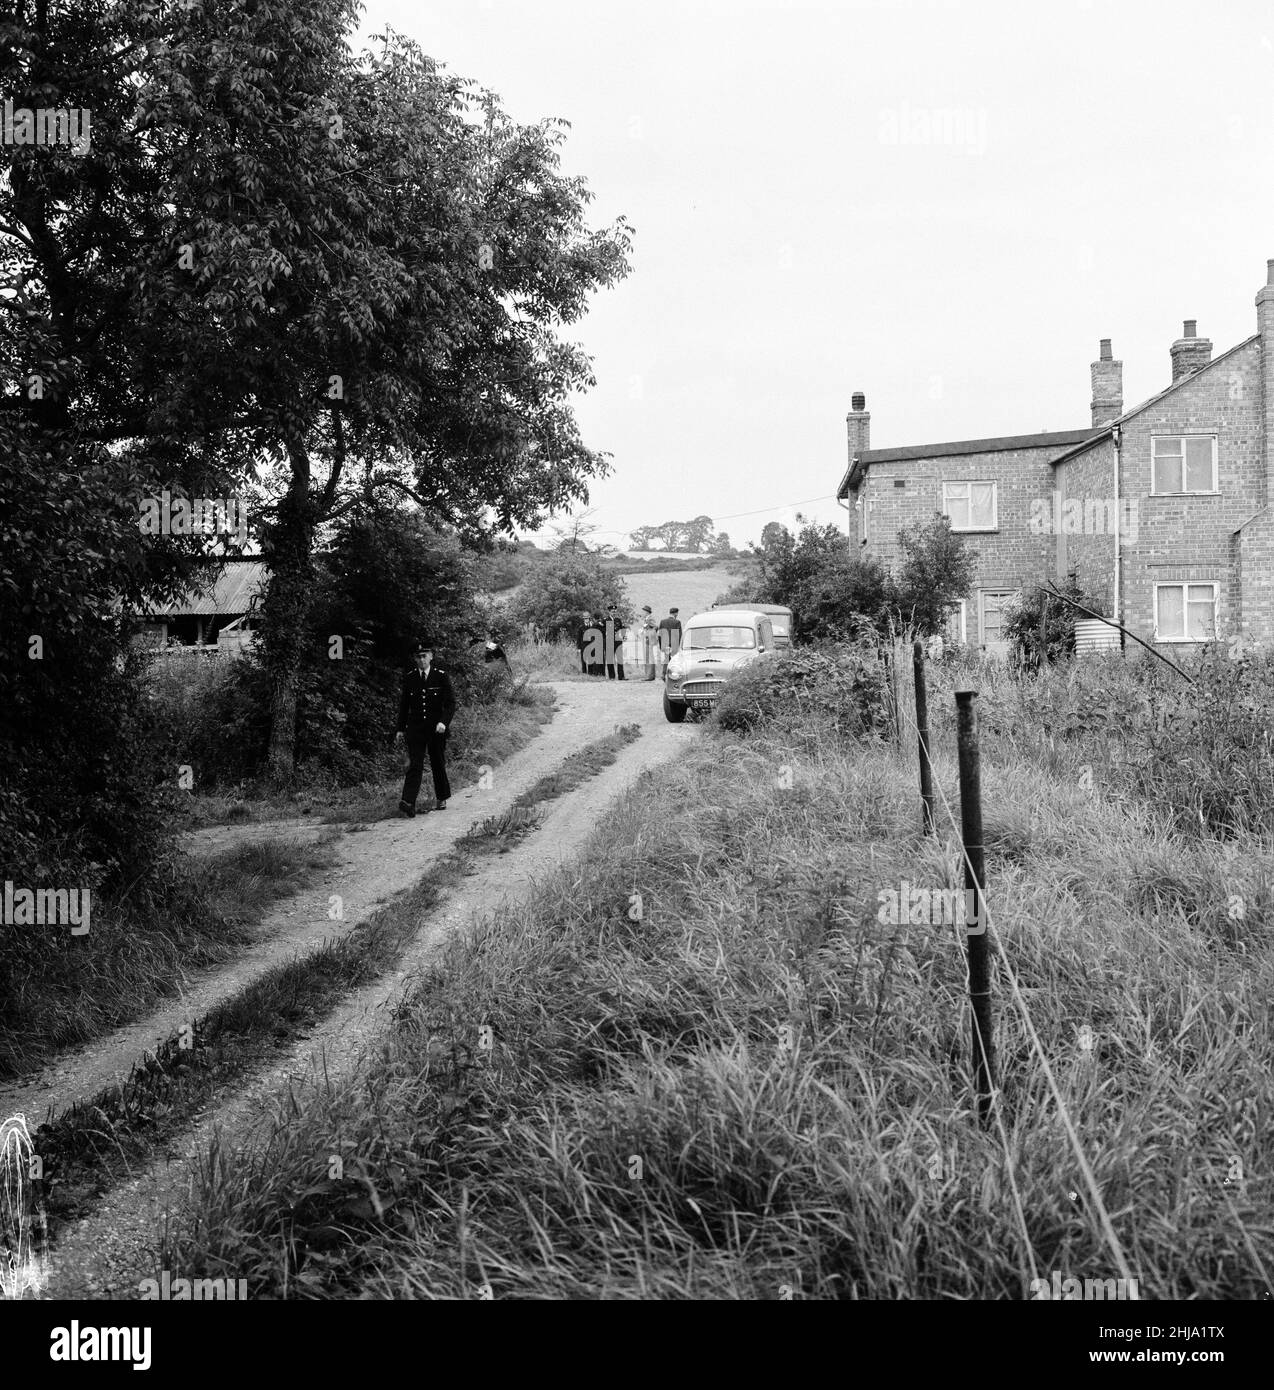 Leatherslade Farm, between Oakley and Brill in Buckinghamshire, hideout used by gang, 27 miles from the crime scene, Tuesday 13th August 1963. Our Picture Shows ... path leading up to remote farmhouse used as hideaway by gang in immediate aftermath of robbery.   The 1963 Great Train Robbery was the robbery of 2.6 million pounds from a Royal Mail train heading from Glasgow to London on the West Coast Main Line in the early hours of 8th August 1963, at Bridego Railway Bridge, Ledburn, near Mentmore in  Buckinghamshire, England. Stock Photo